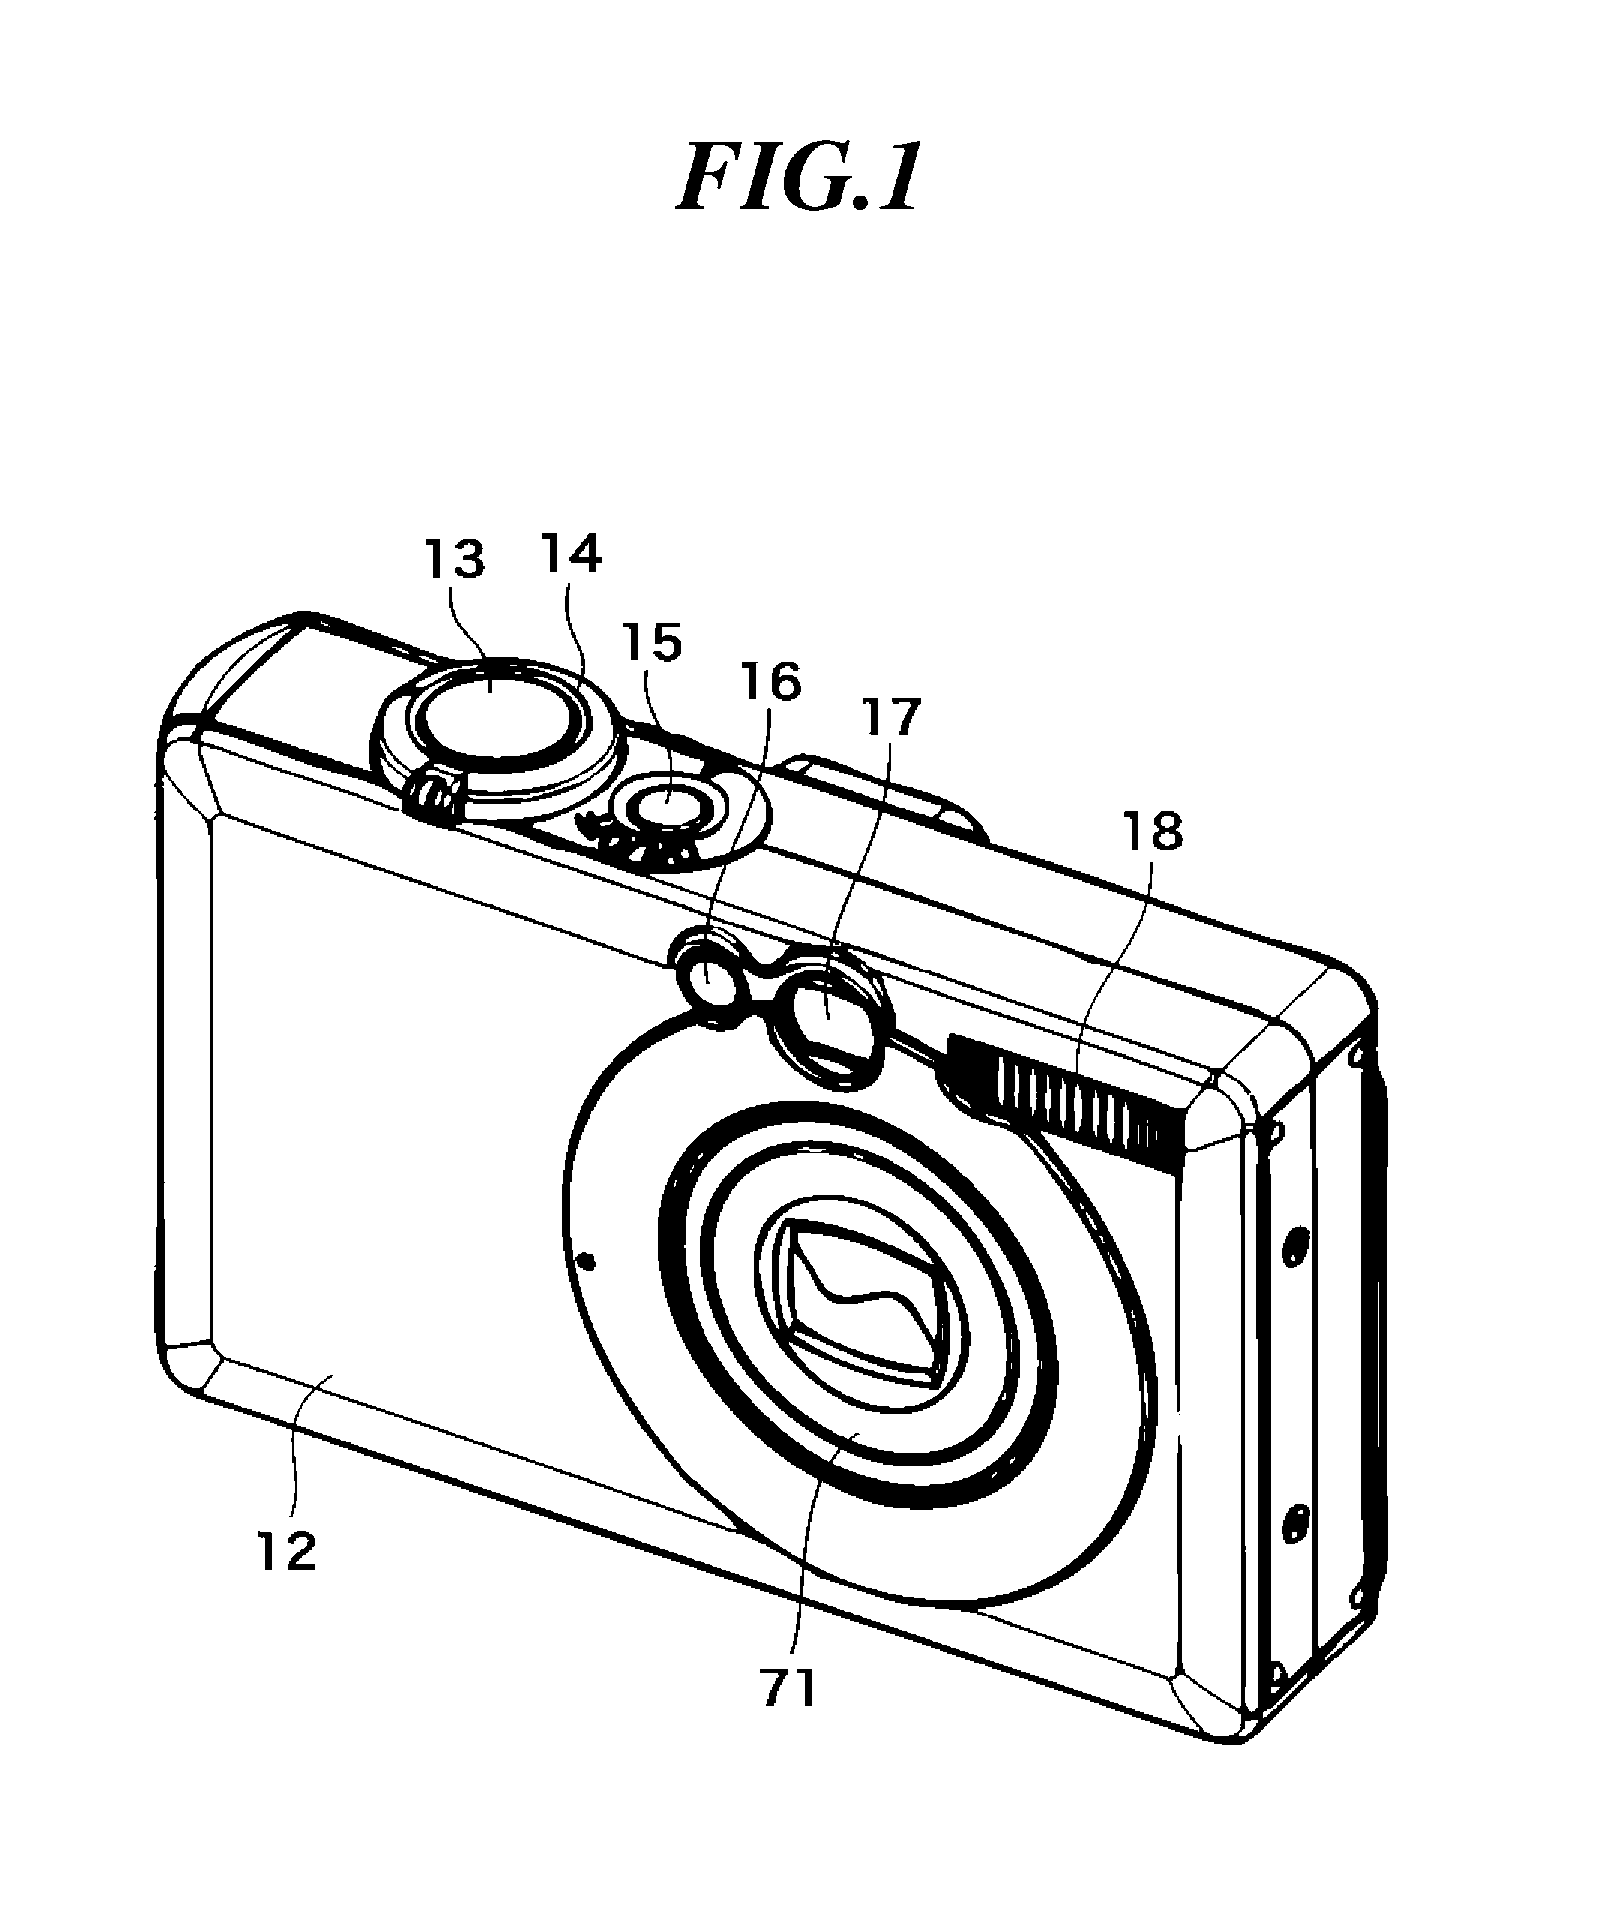 Lens barrel that changes focal length and image pickup apparatus equipped with lens barrel